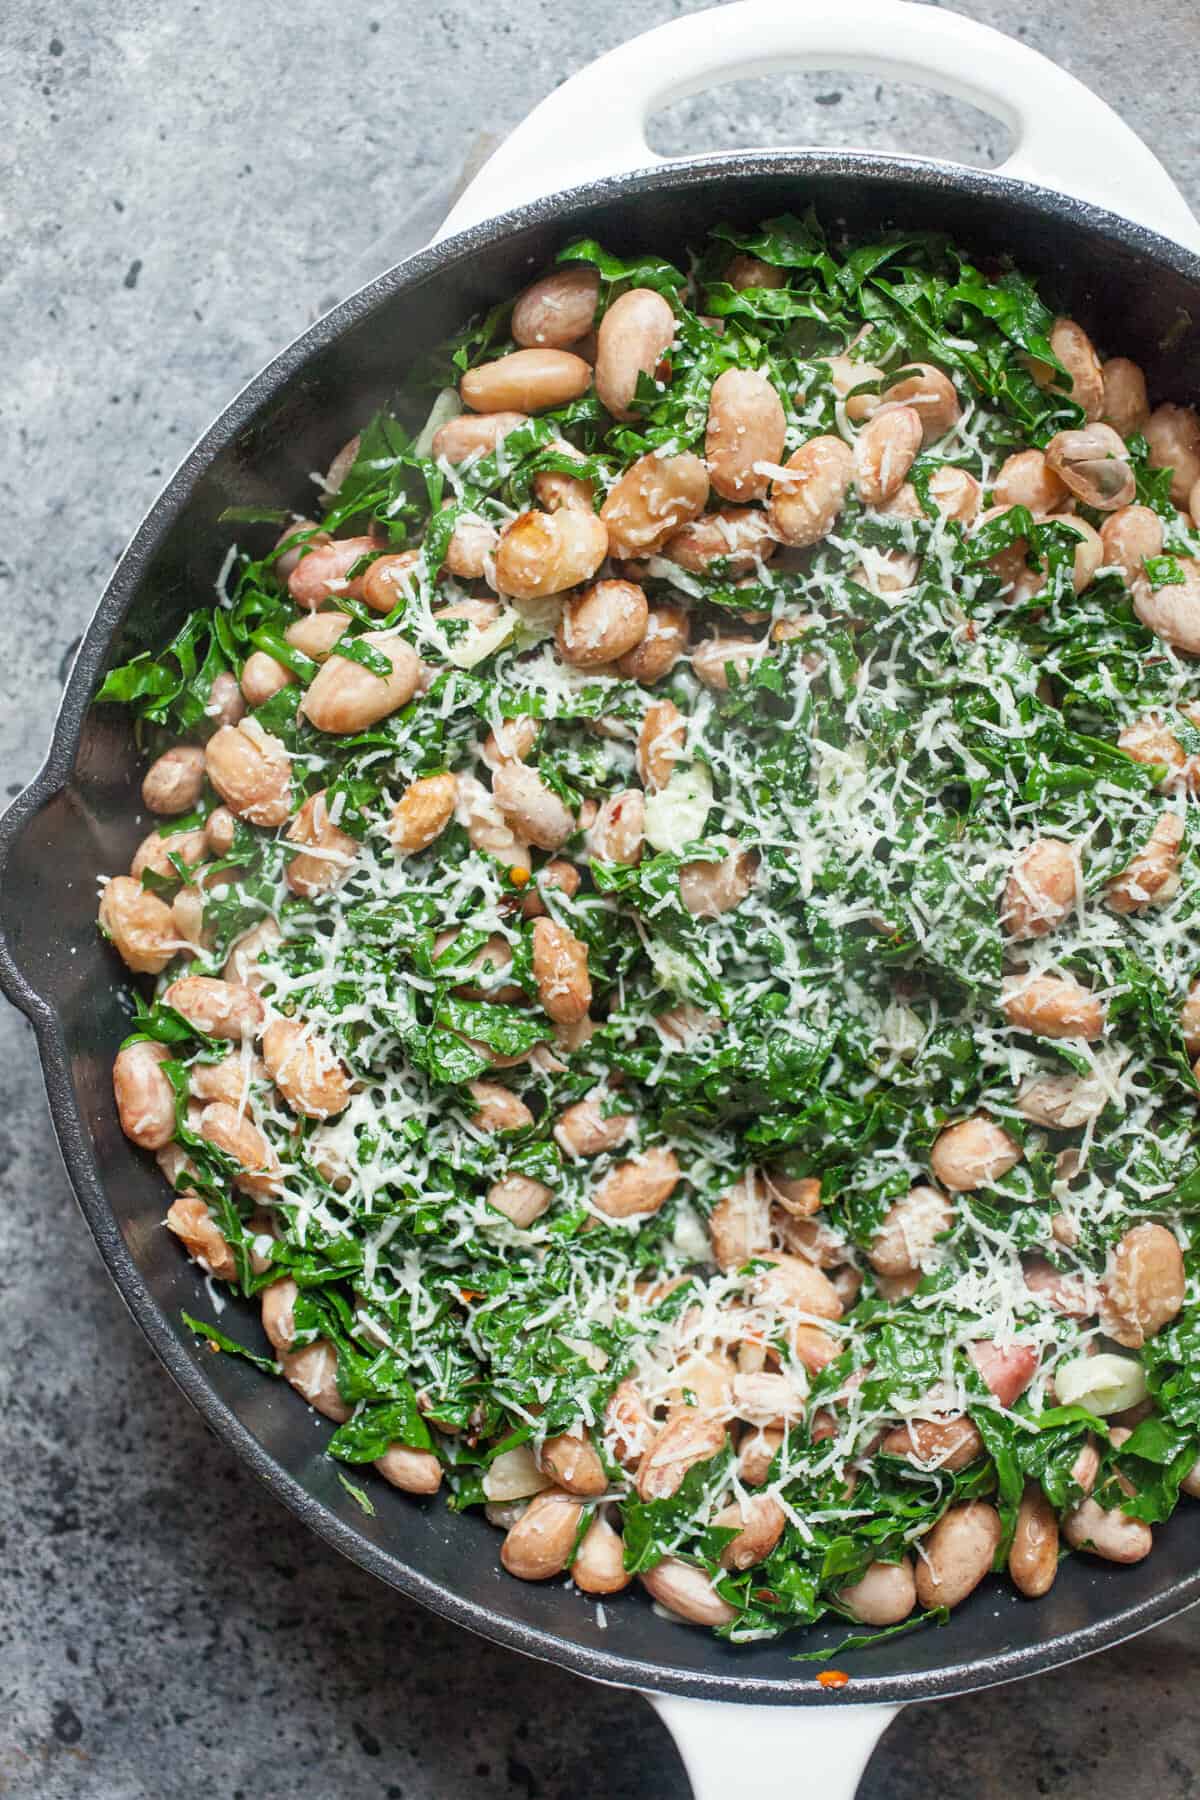 Garlicky bean and kale salad: This bright, colorful, and healthy salad is the perfect side salad for summer. Take it to BBQs and pair it with any grilled dish. Don't skimp on the garlic! | macheesmo.com